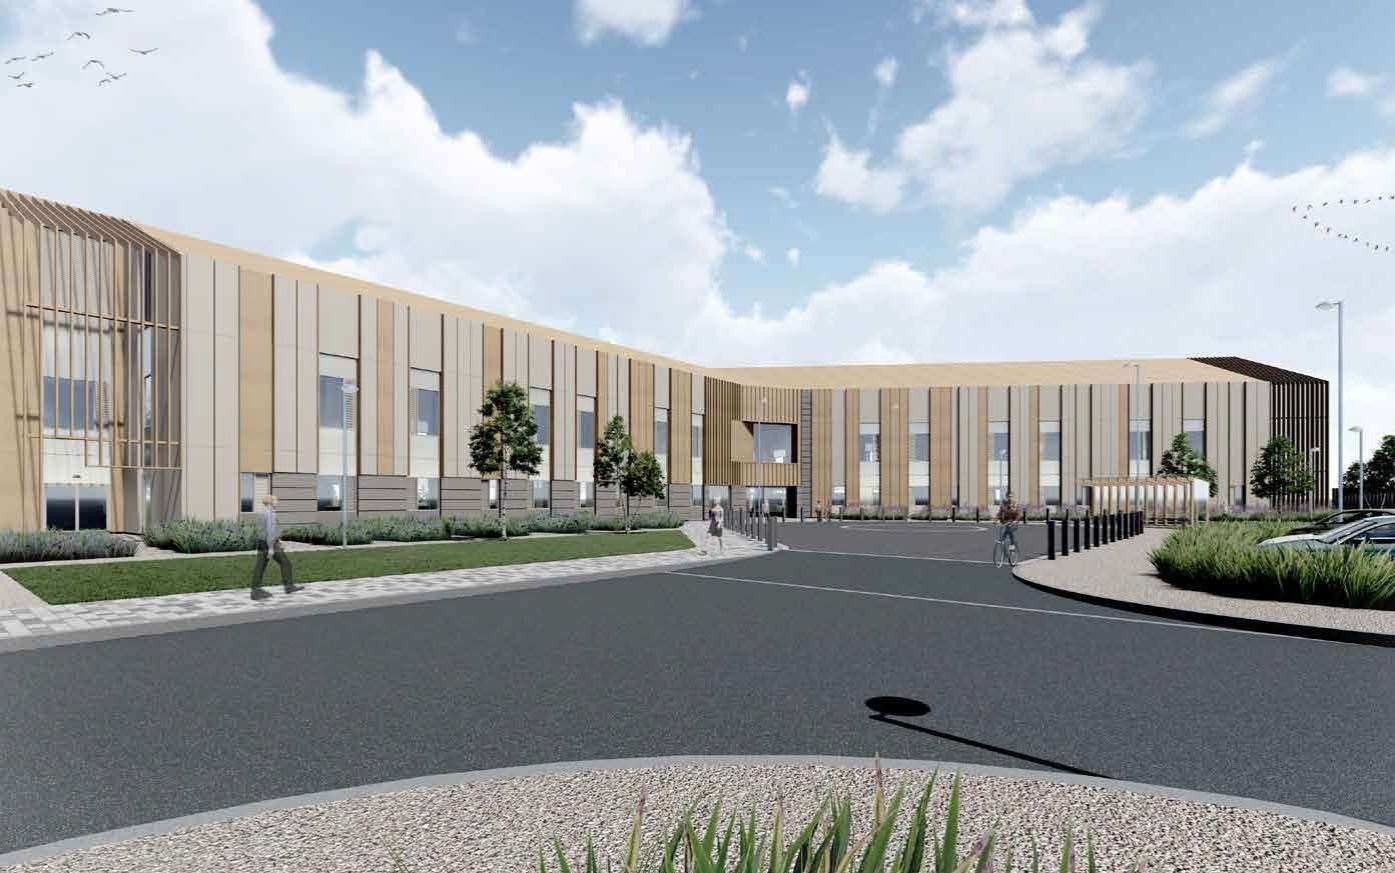 An artist's impression of the new treatment centre to be built at Inverness Campus.